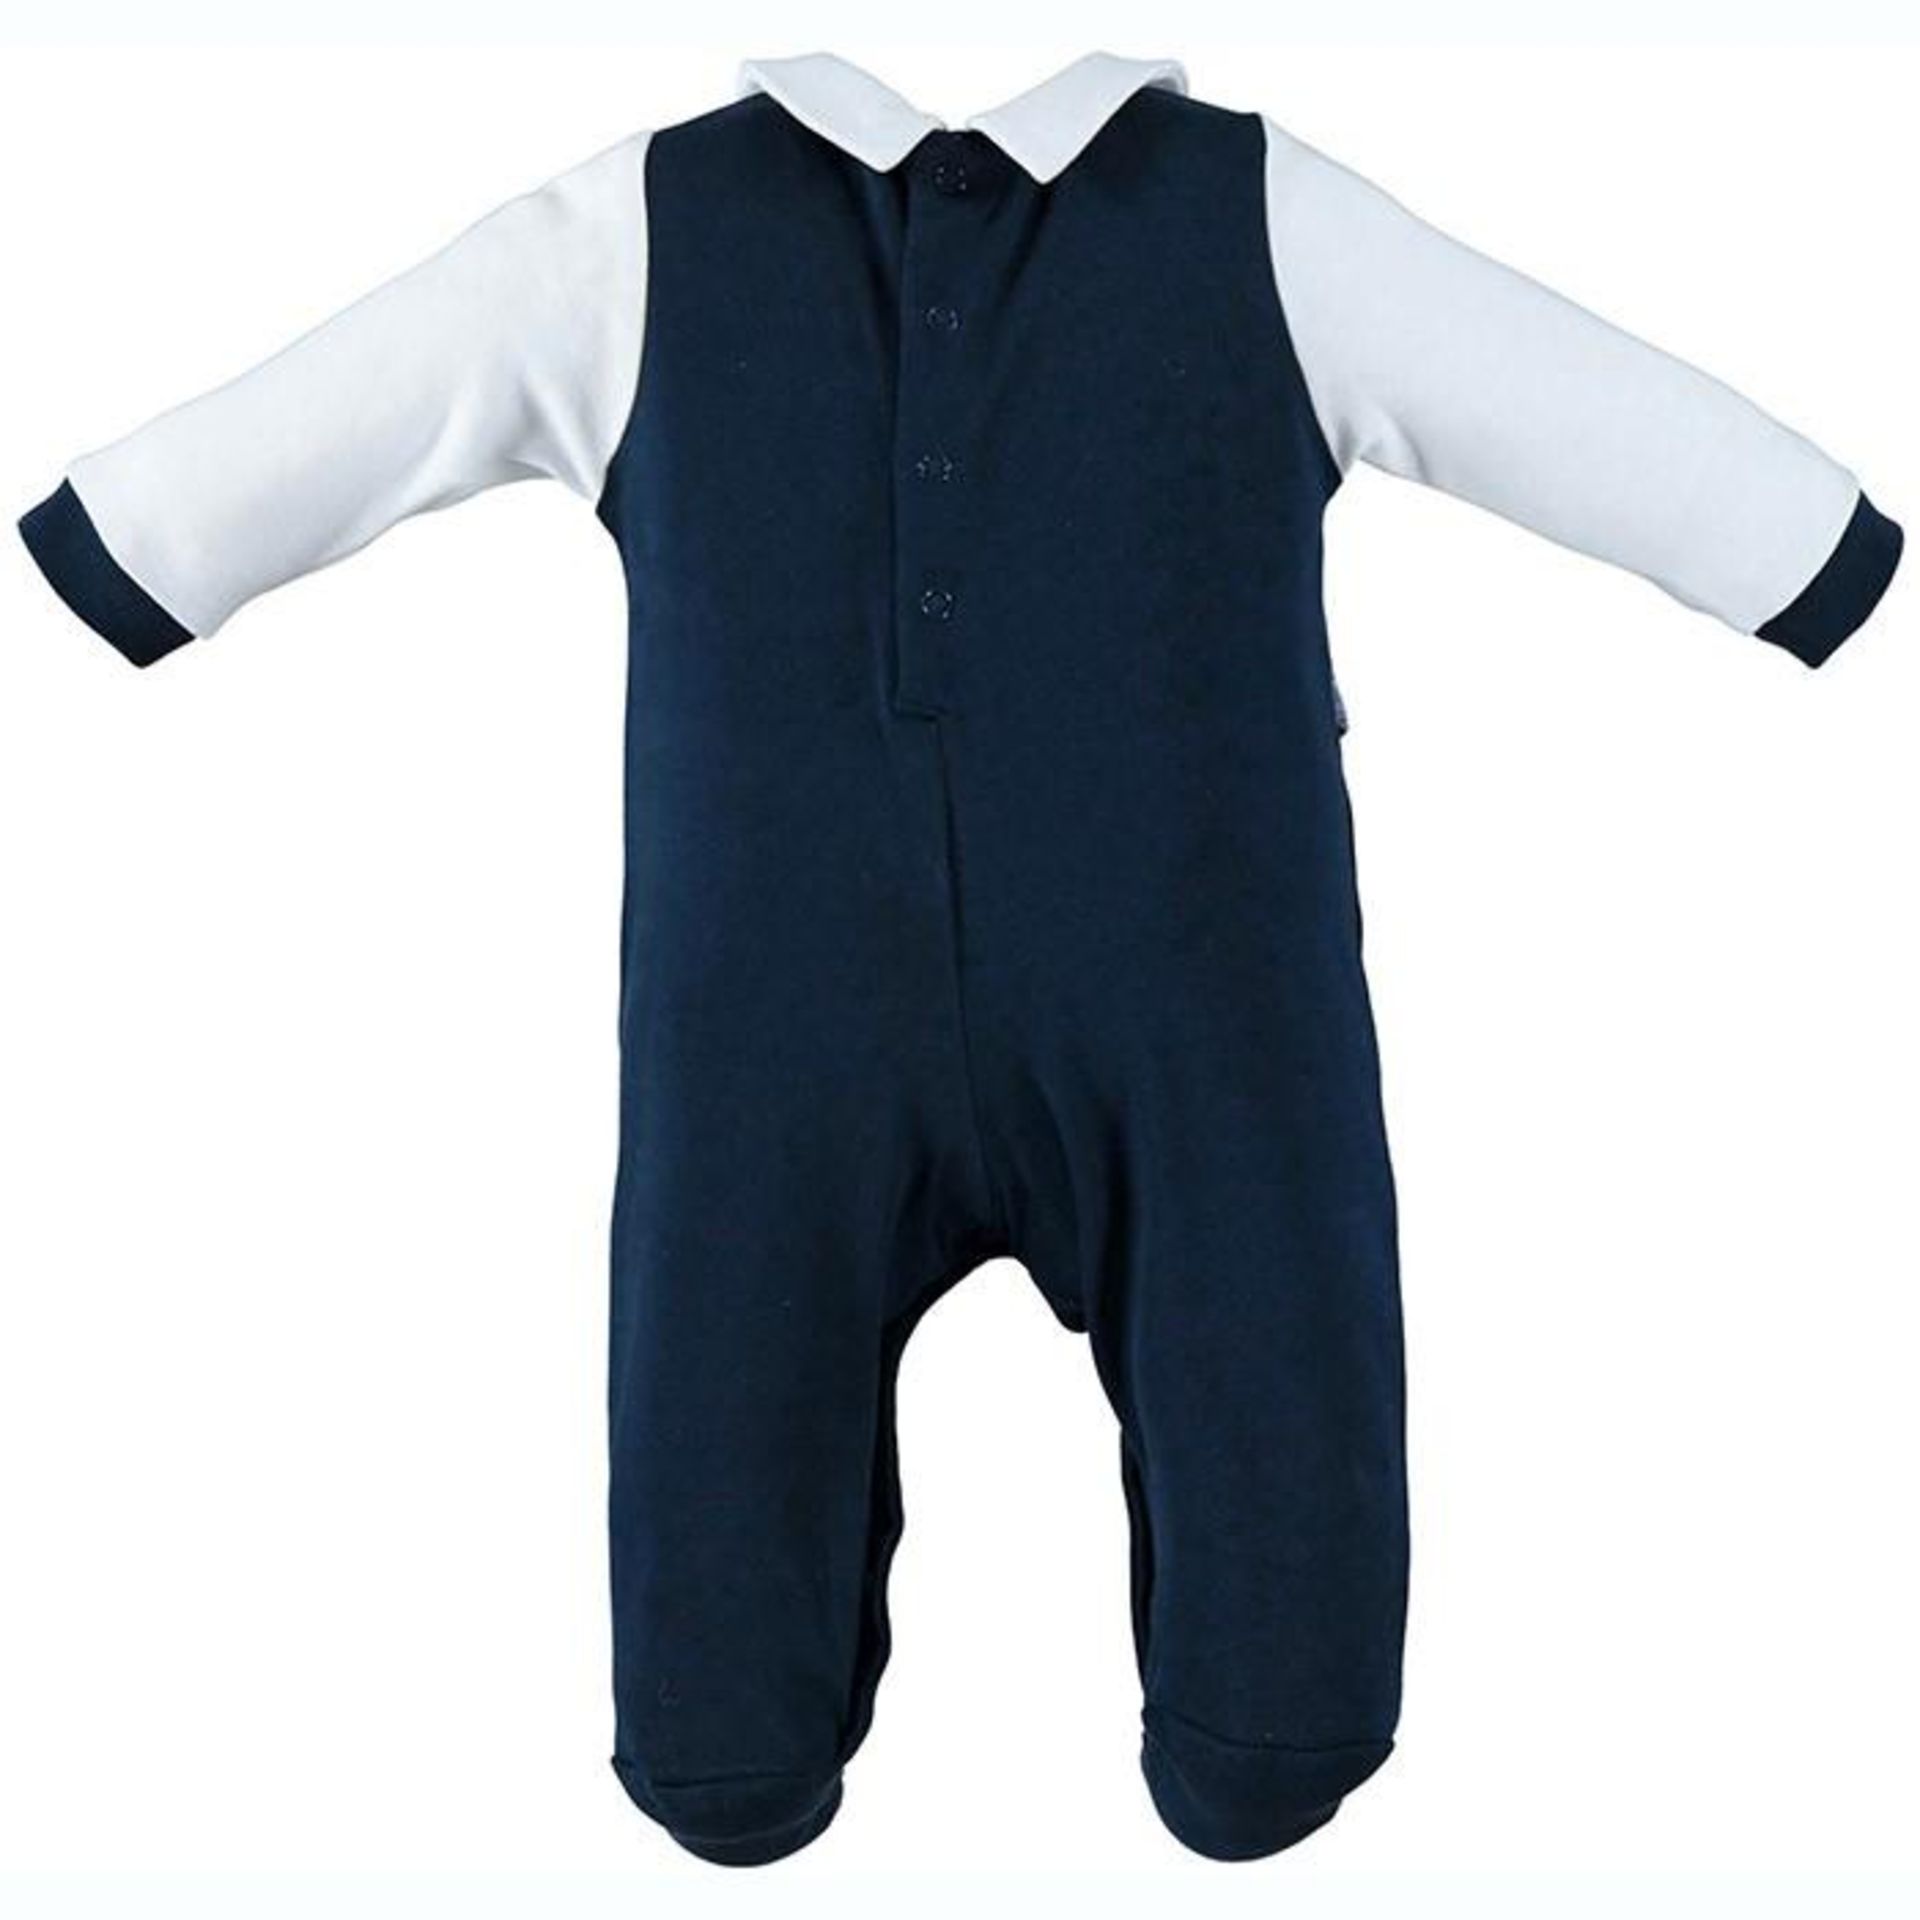 1 x iDO Overalls - New With Tags - Size: 1M - Ref: W054 - CL580 - NO VAT ON THE HAMMER - Location: A - Image 2 of 2